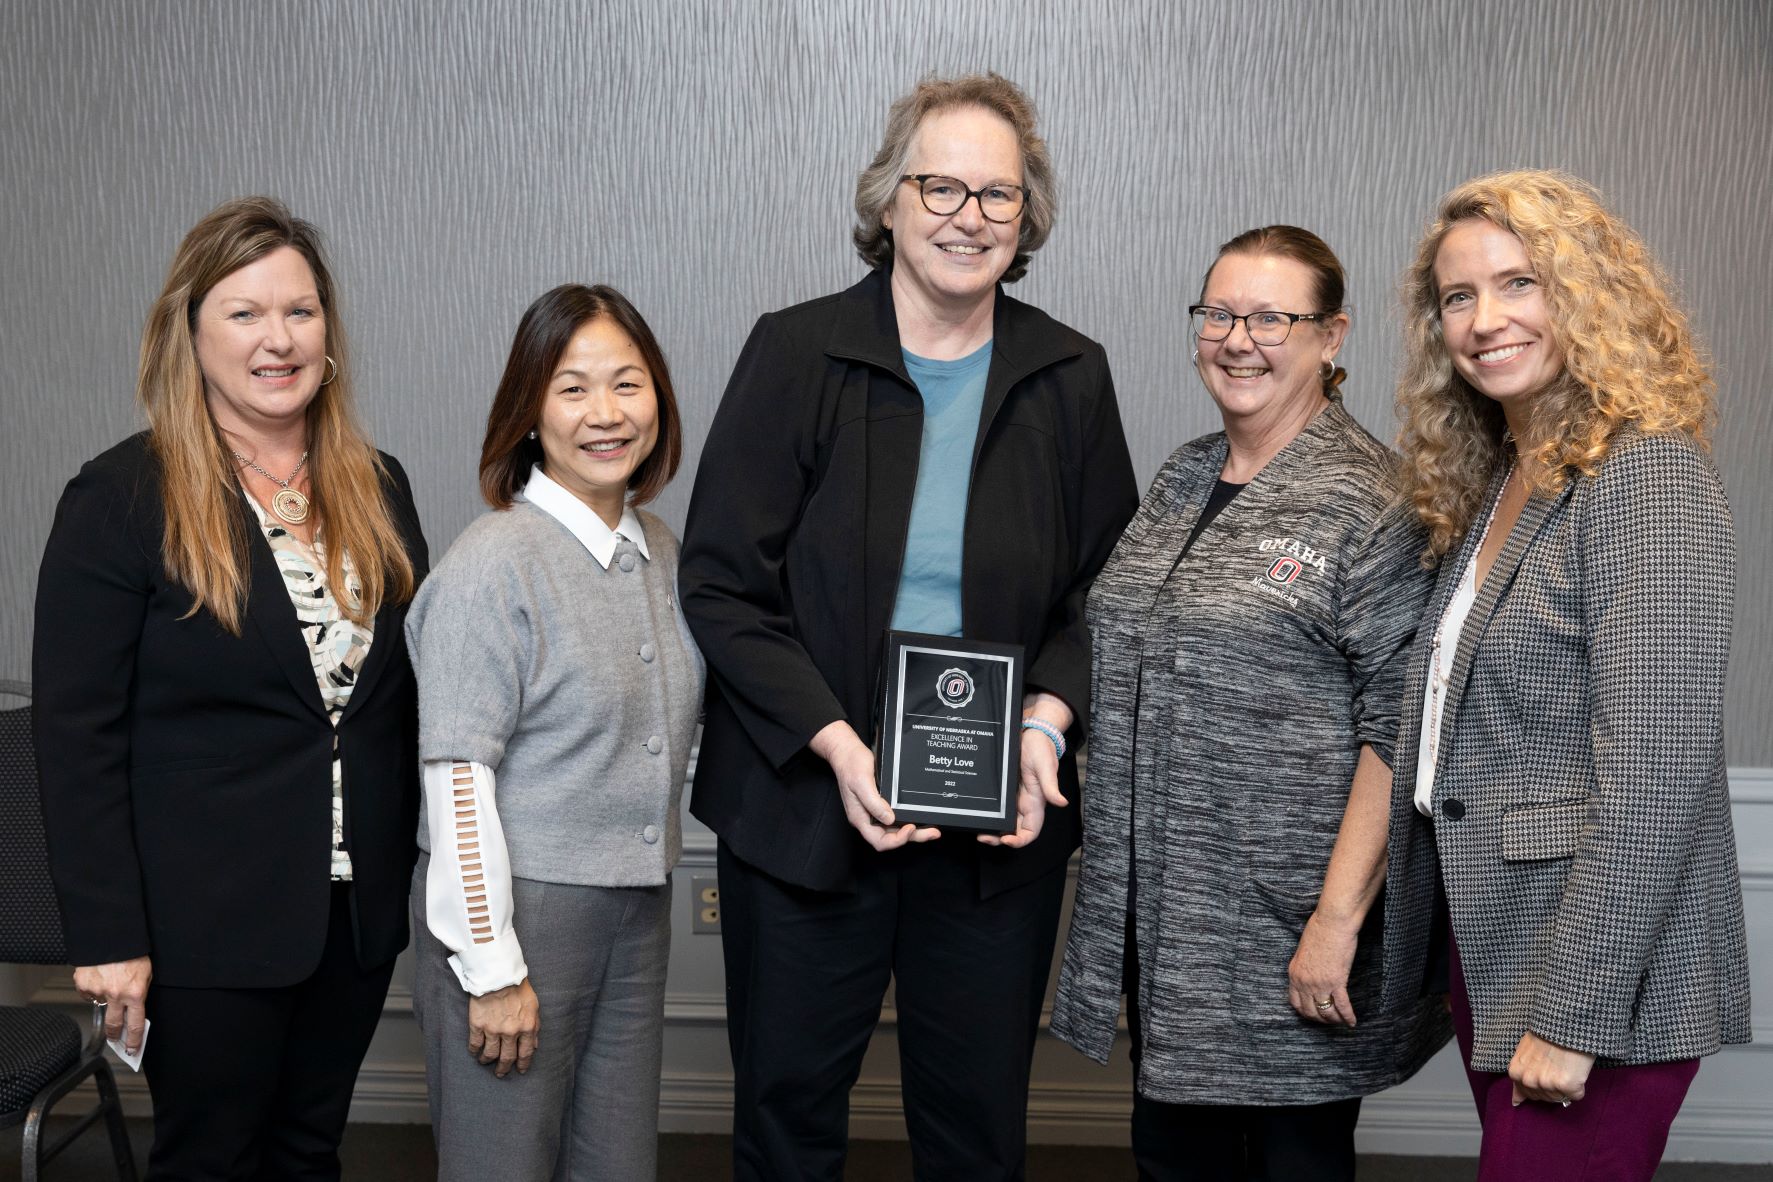 Assistant Vice Chancellor for Faculty Affairs Candice Batton (left), Chancellor Joanne Li, Betty Love, Excellence in Teaching Award recipient, Interim Senior Vice Chancellor for Academic Affairs Deborah Smith-Howell, and Interim Dean Melanie Bloom.